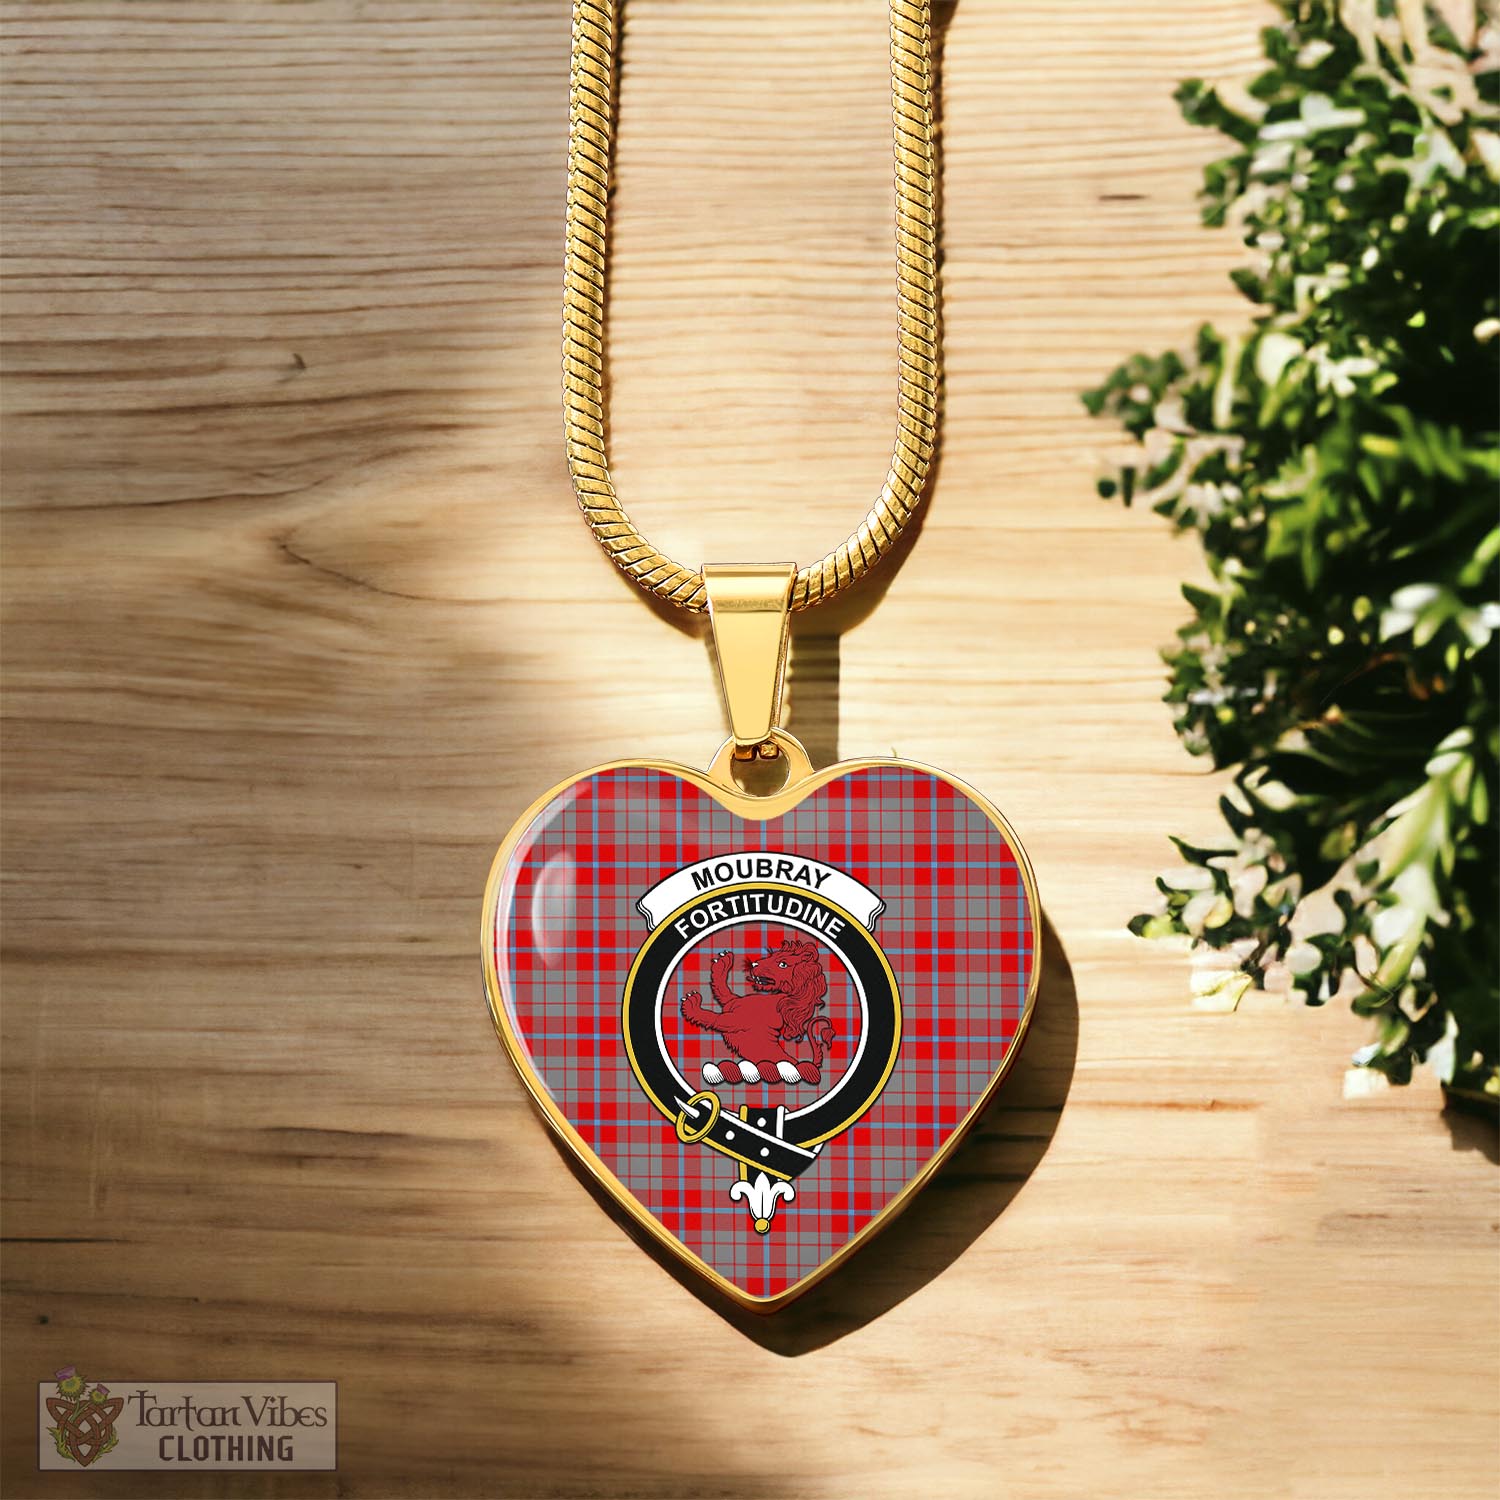 Tartan Vibes Clothing Moubray Tartan Heart Necklace with Family Crest